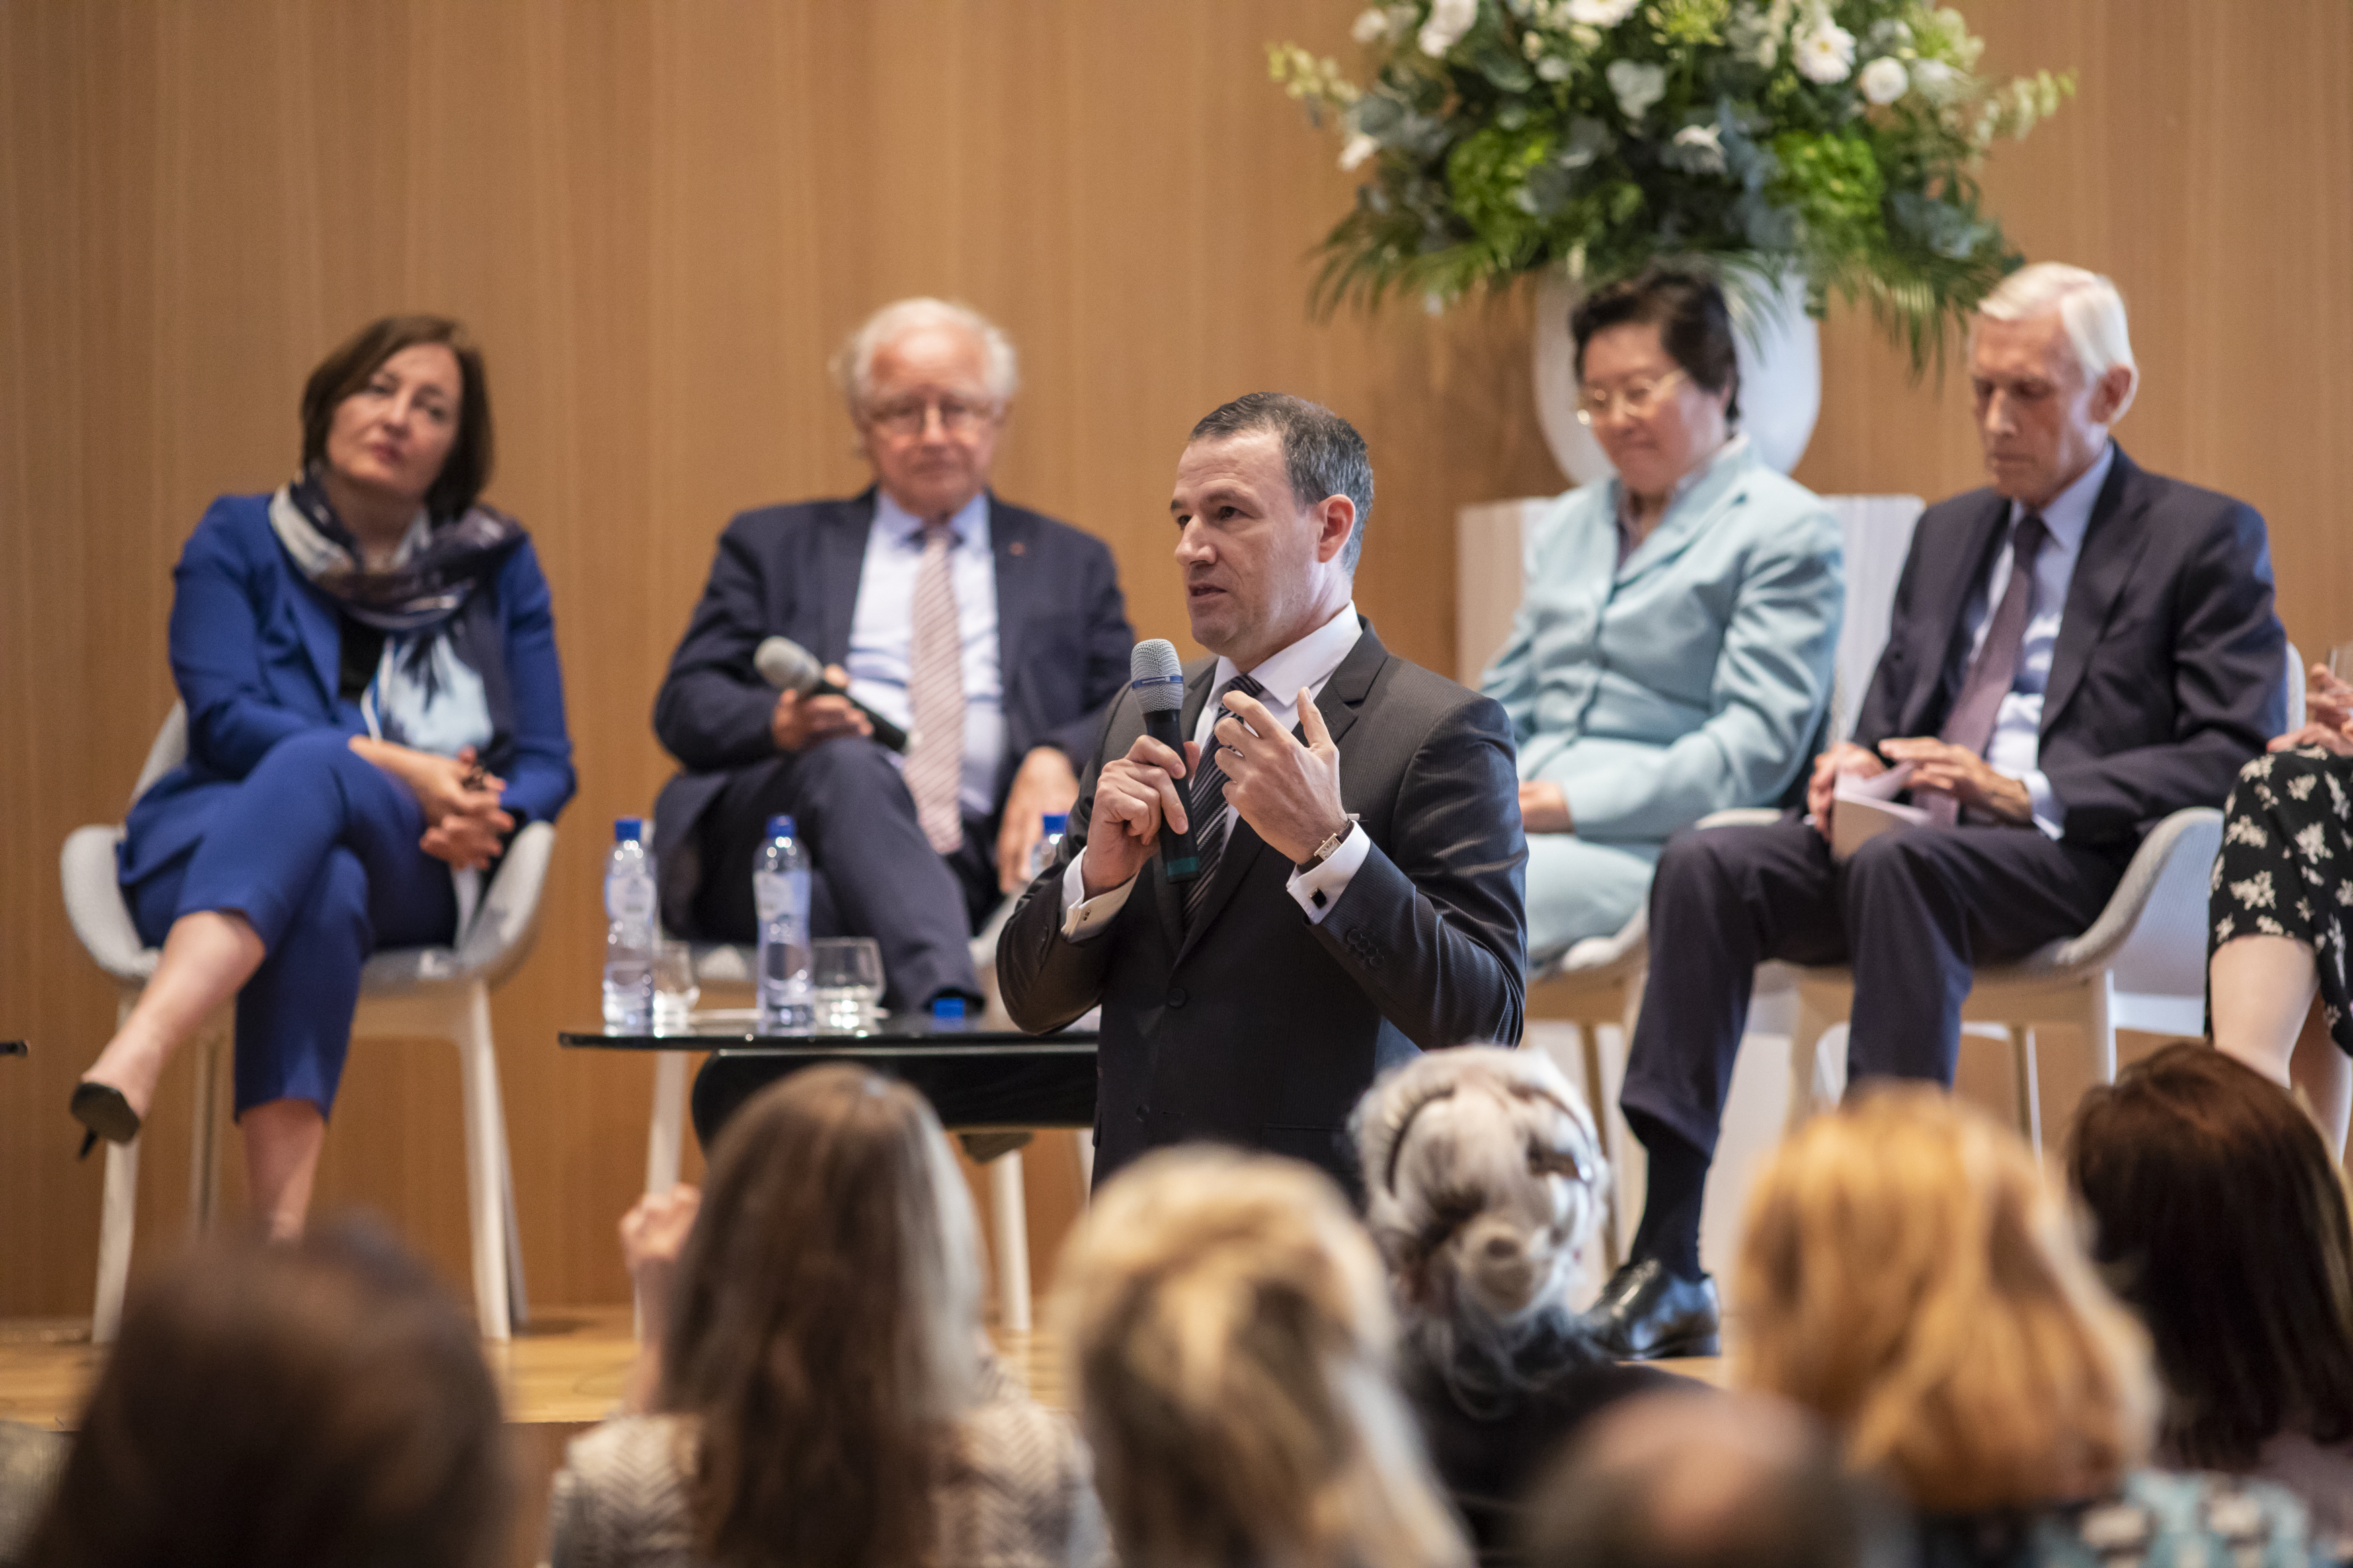 Dr. Boutros-Ghali Commemoration at The Hague Academy of International Law June 21 2018